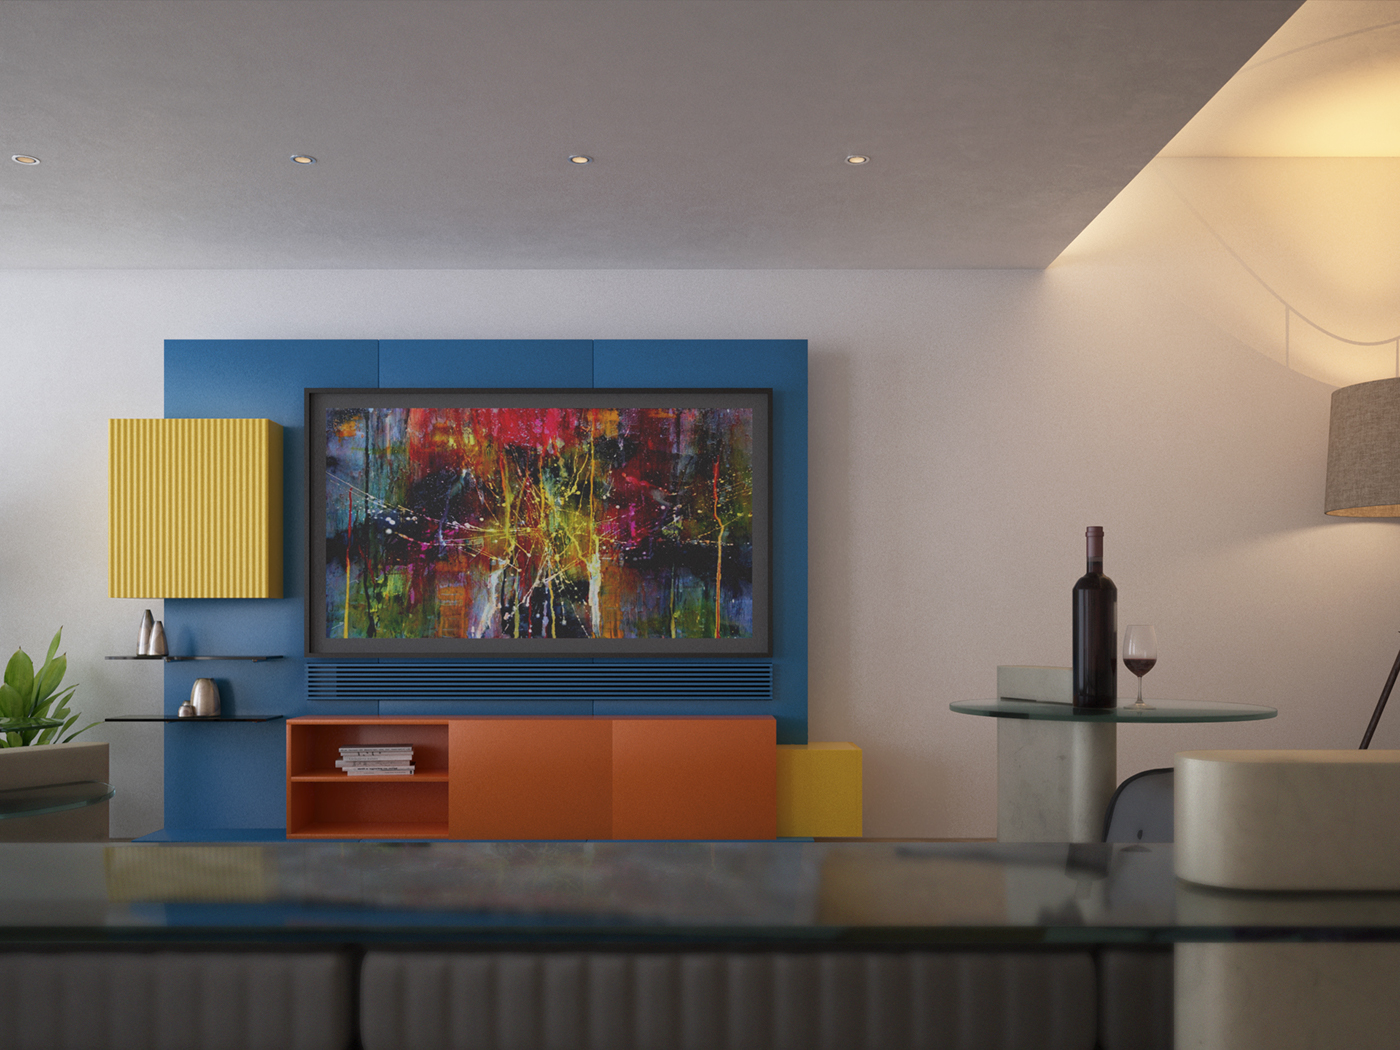 3ds max vray rendering Render vray architecture Interior concept roche bobois Photography  mah jong